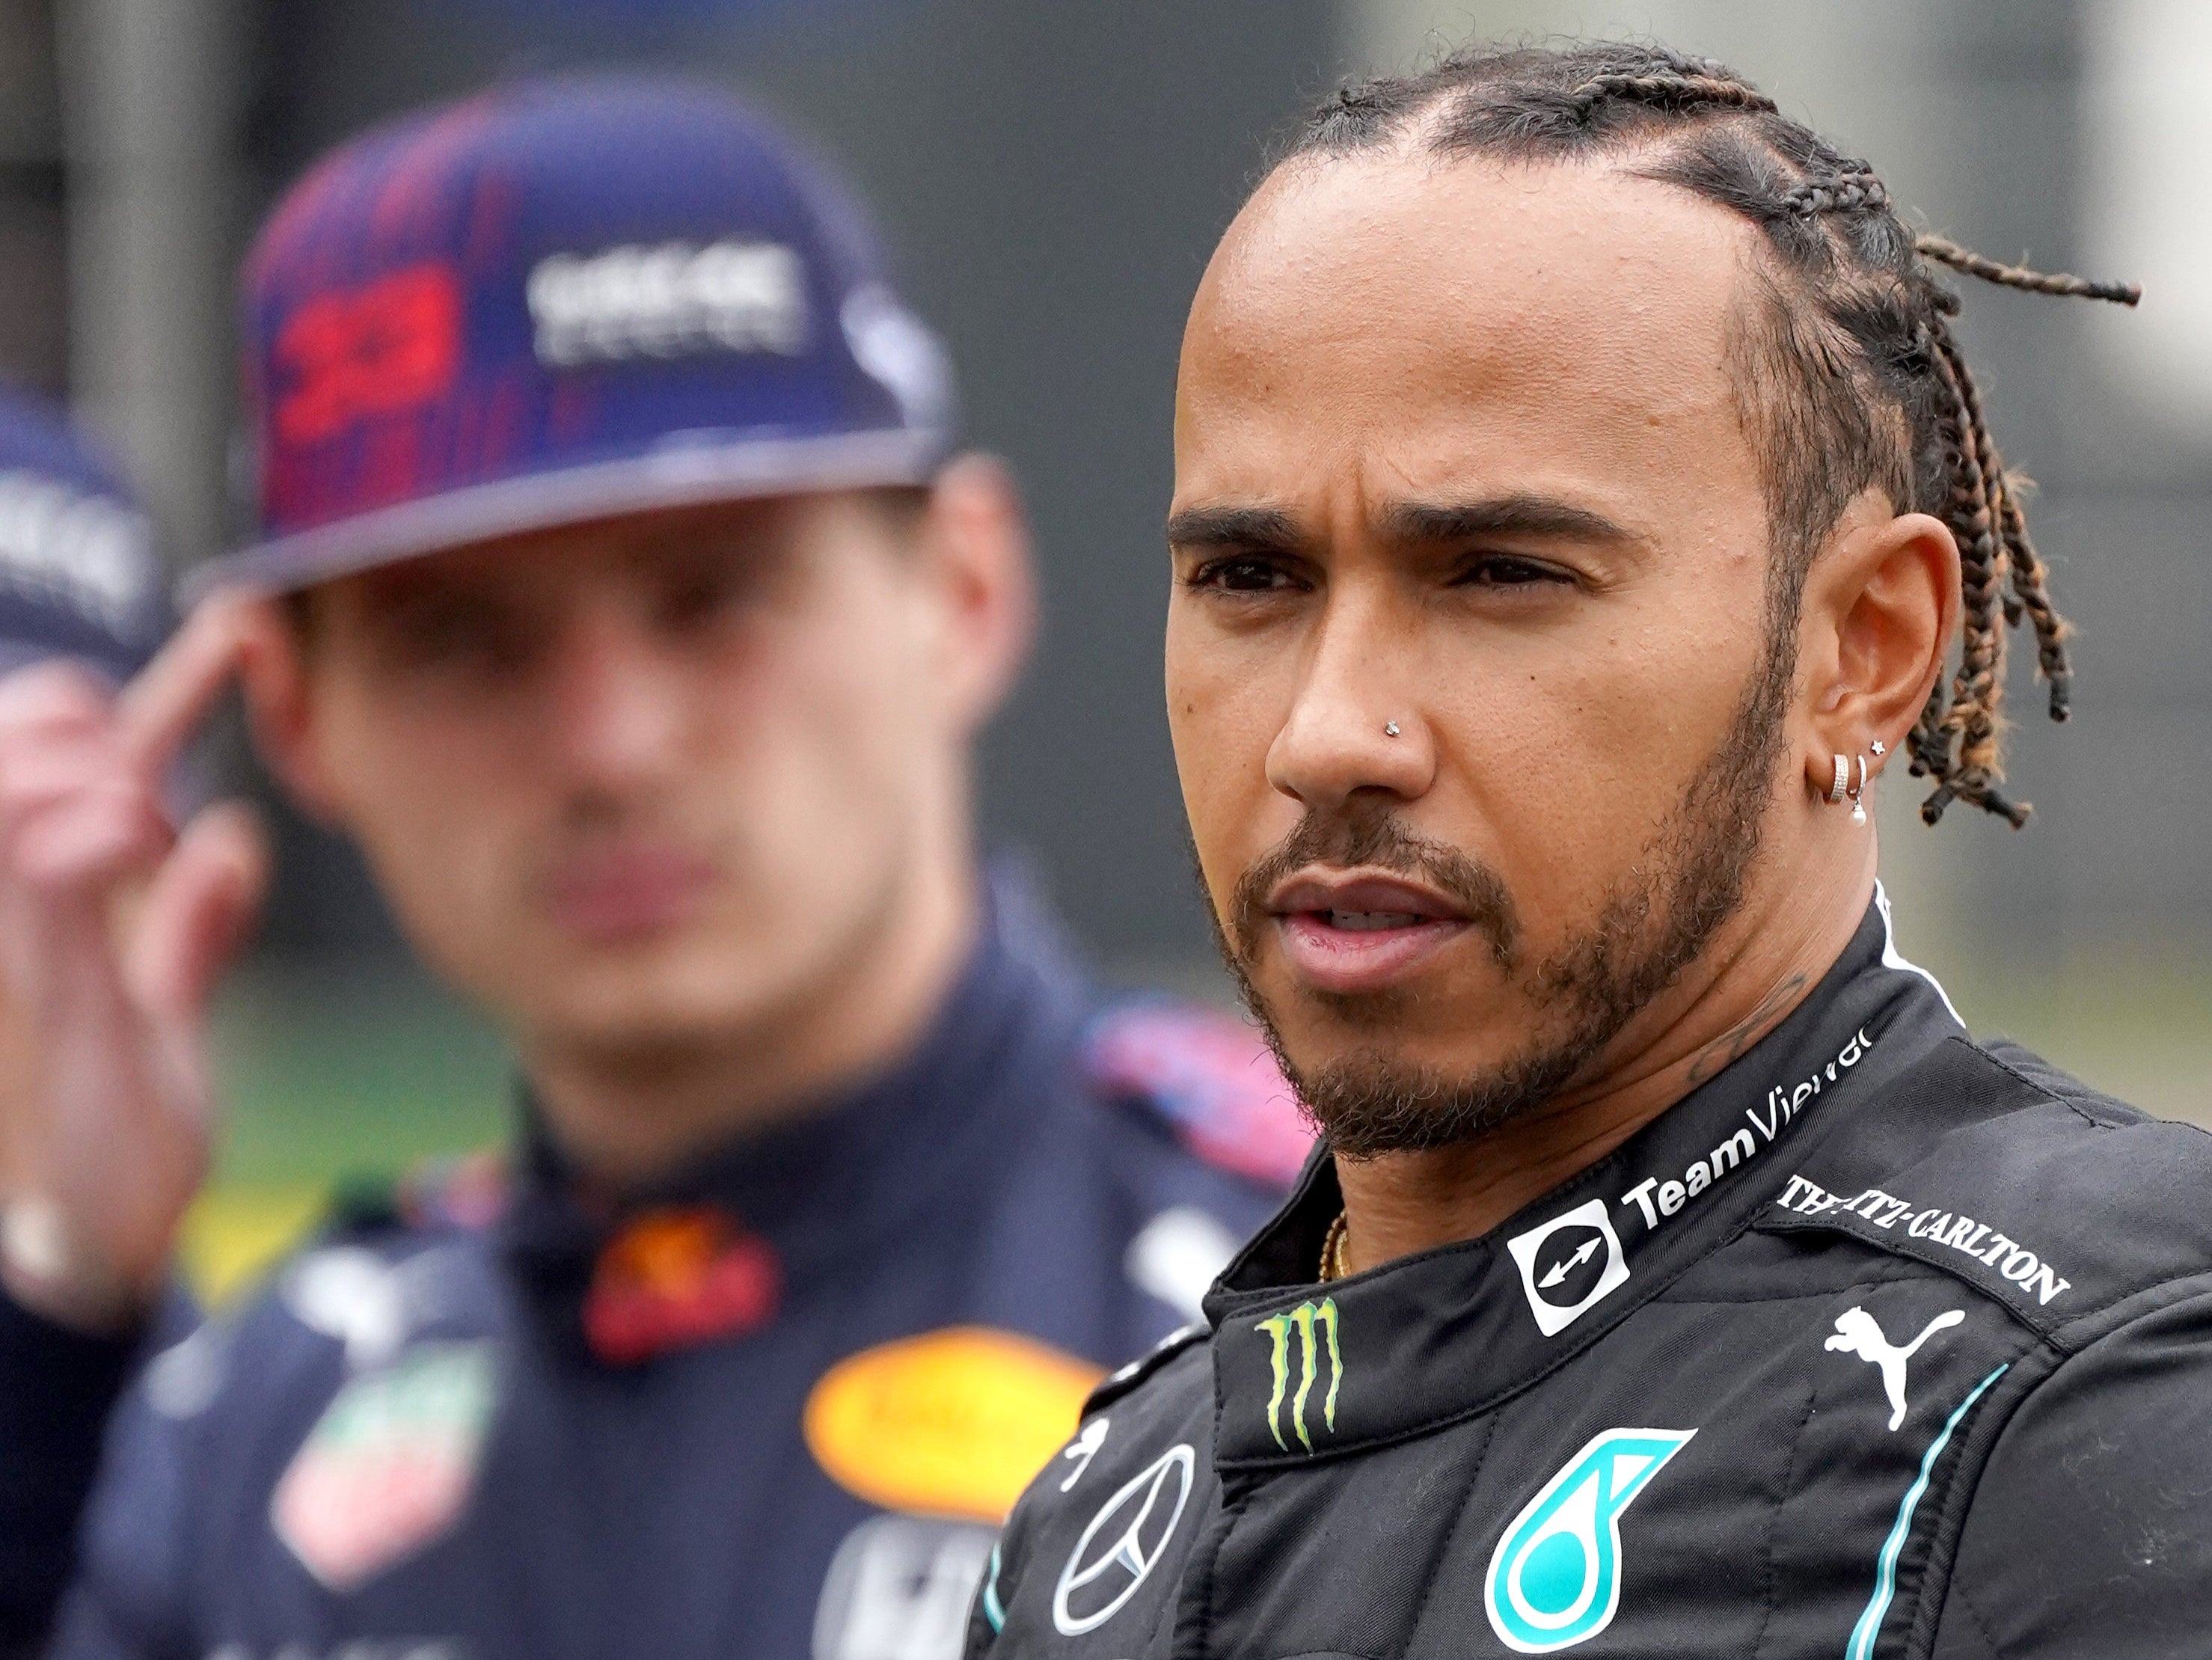 Mercedes driver Lewis Hamilton and Red Bull rival Max Verstappen (Tim Goode/PA)